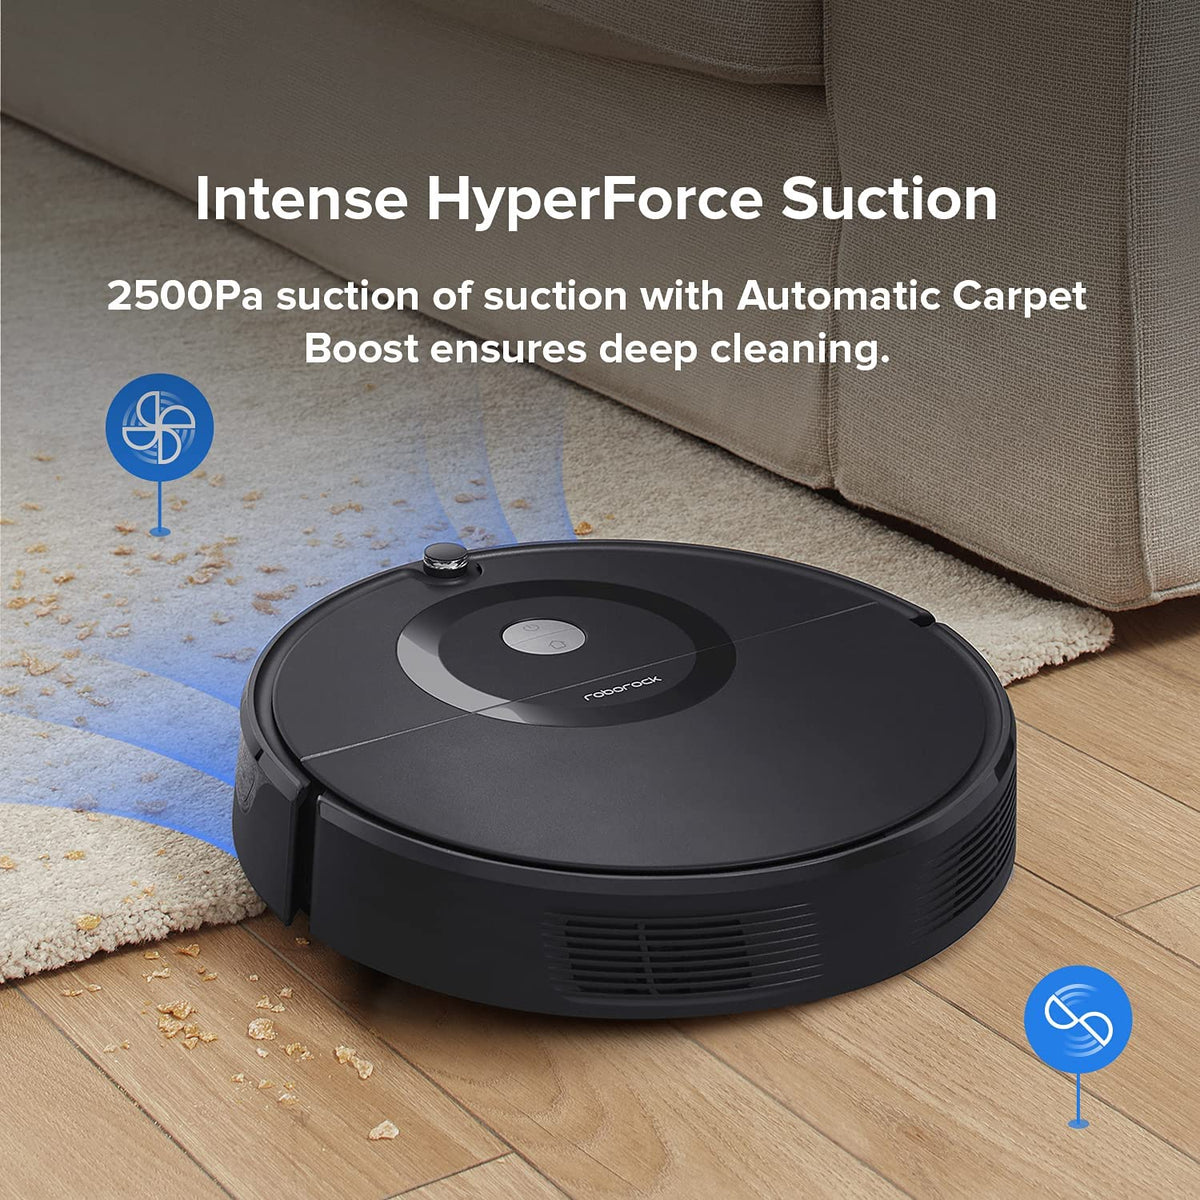 Xiaomi Robot Vacuum E12, WiFi, Vacuum cleaner and mop, Gyroscopic tech –  Gadget Station